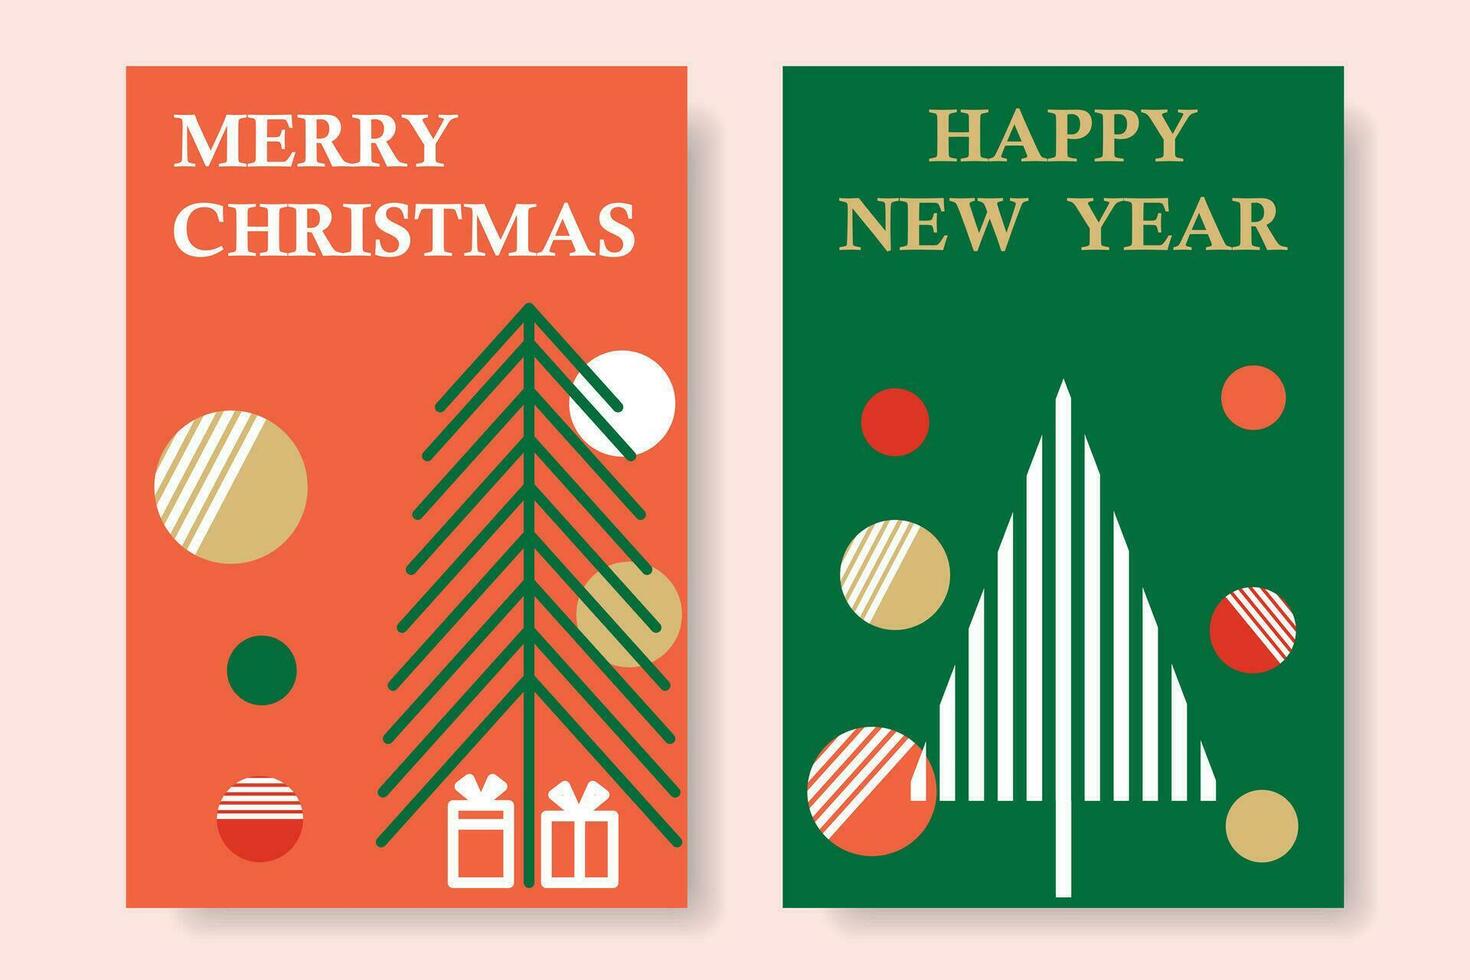 New Year card design with a stylized Christmas tree and balls. Holiday posters Merry Christmas and Happy New Year. vector